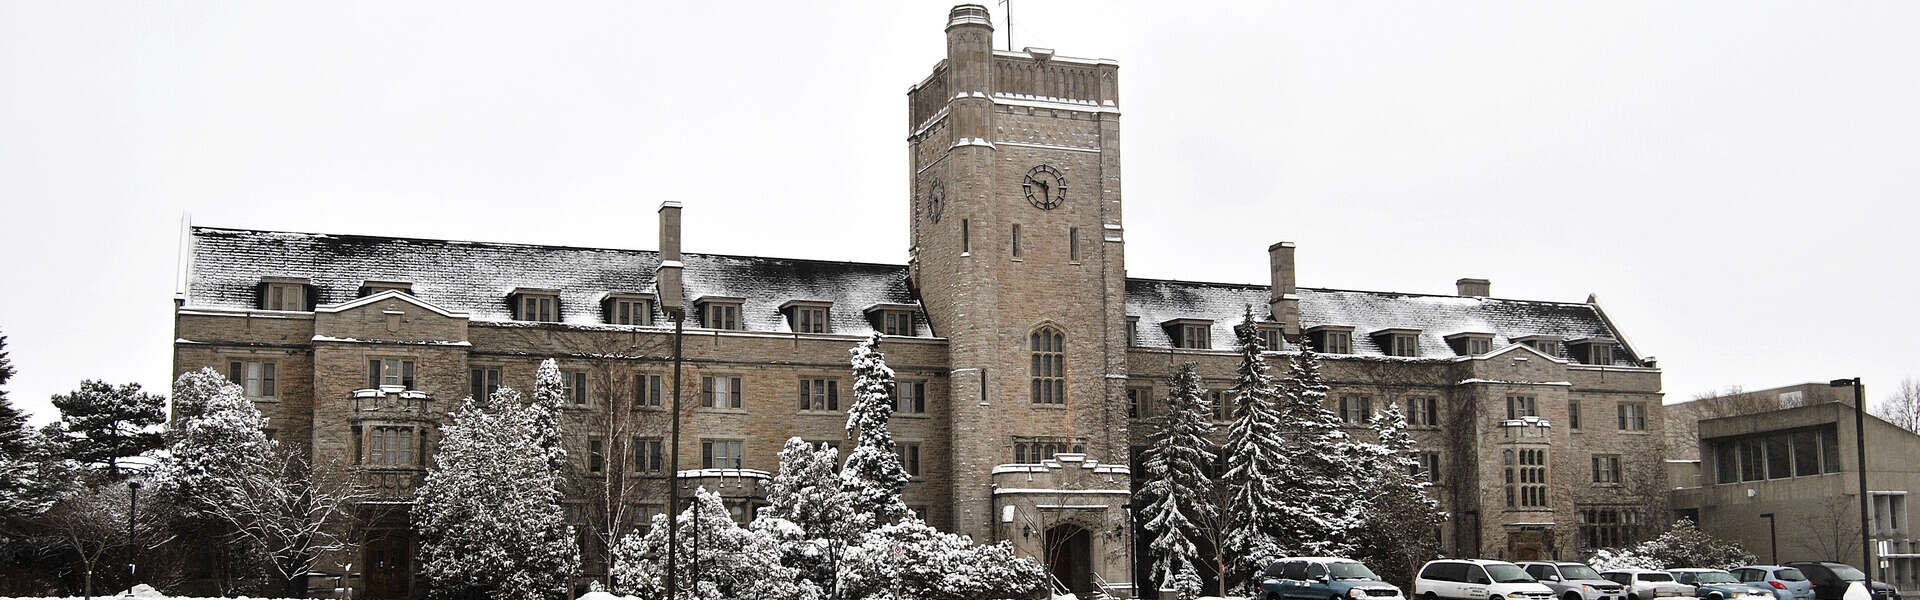 Johnston Hall on the U of G campus covered in snow